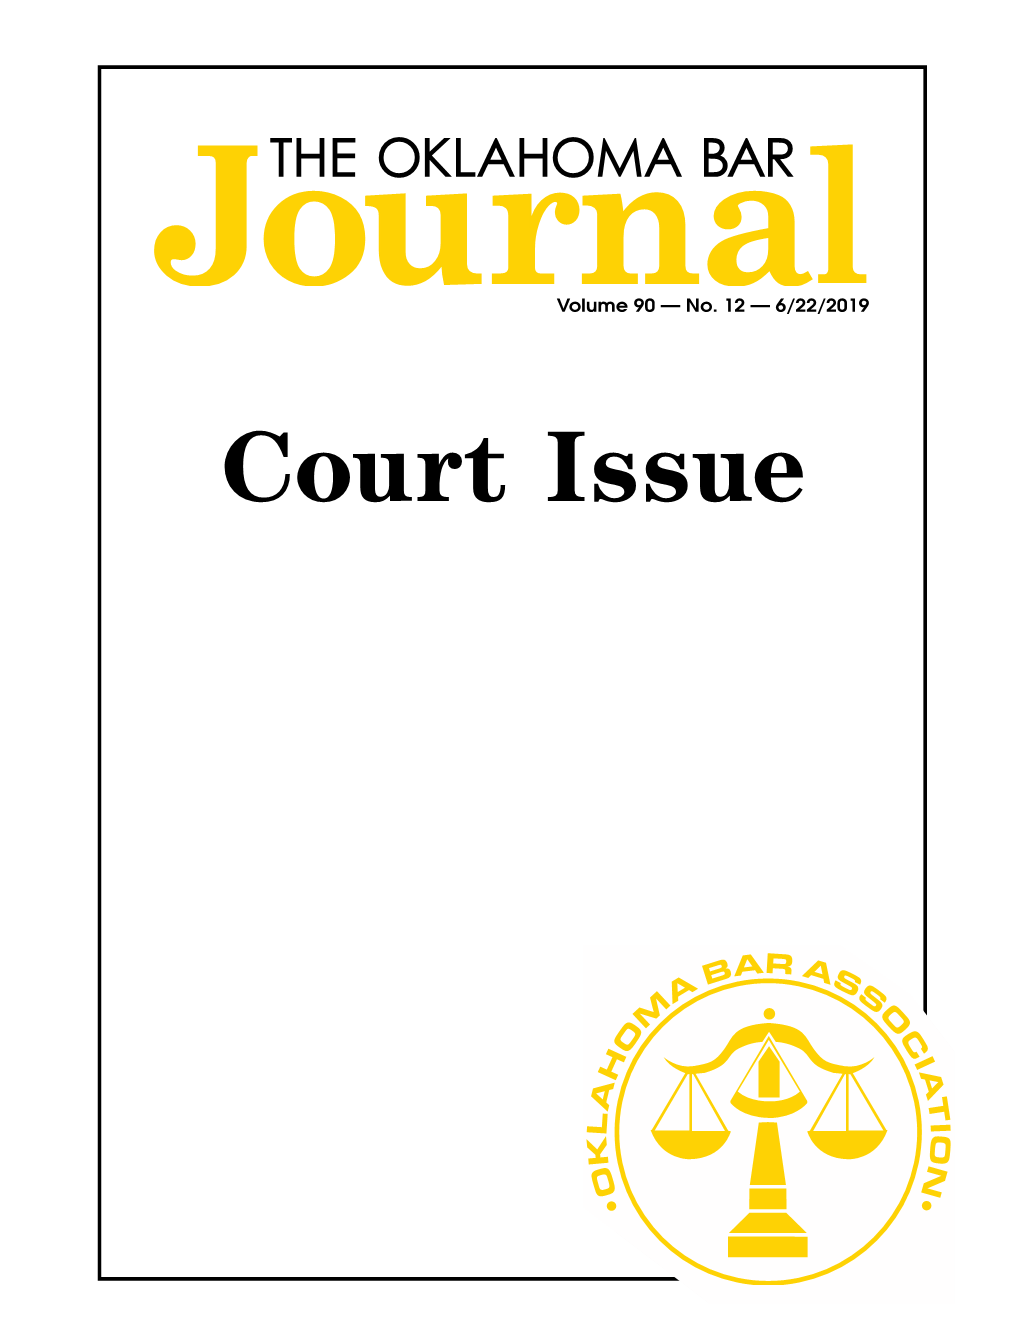 Court Issue 708 the Oklahoma Bar Journal Vol